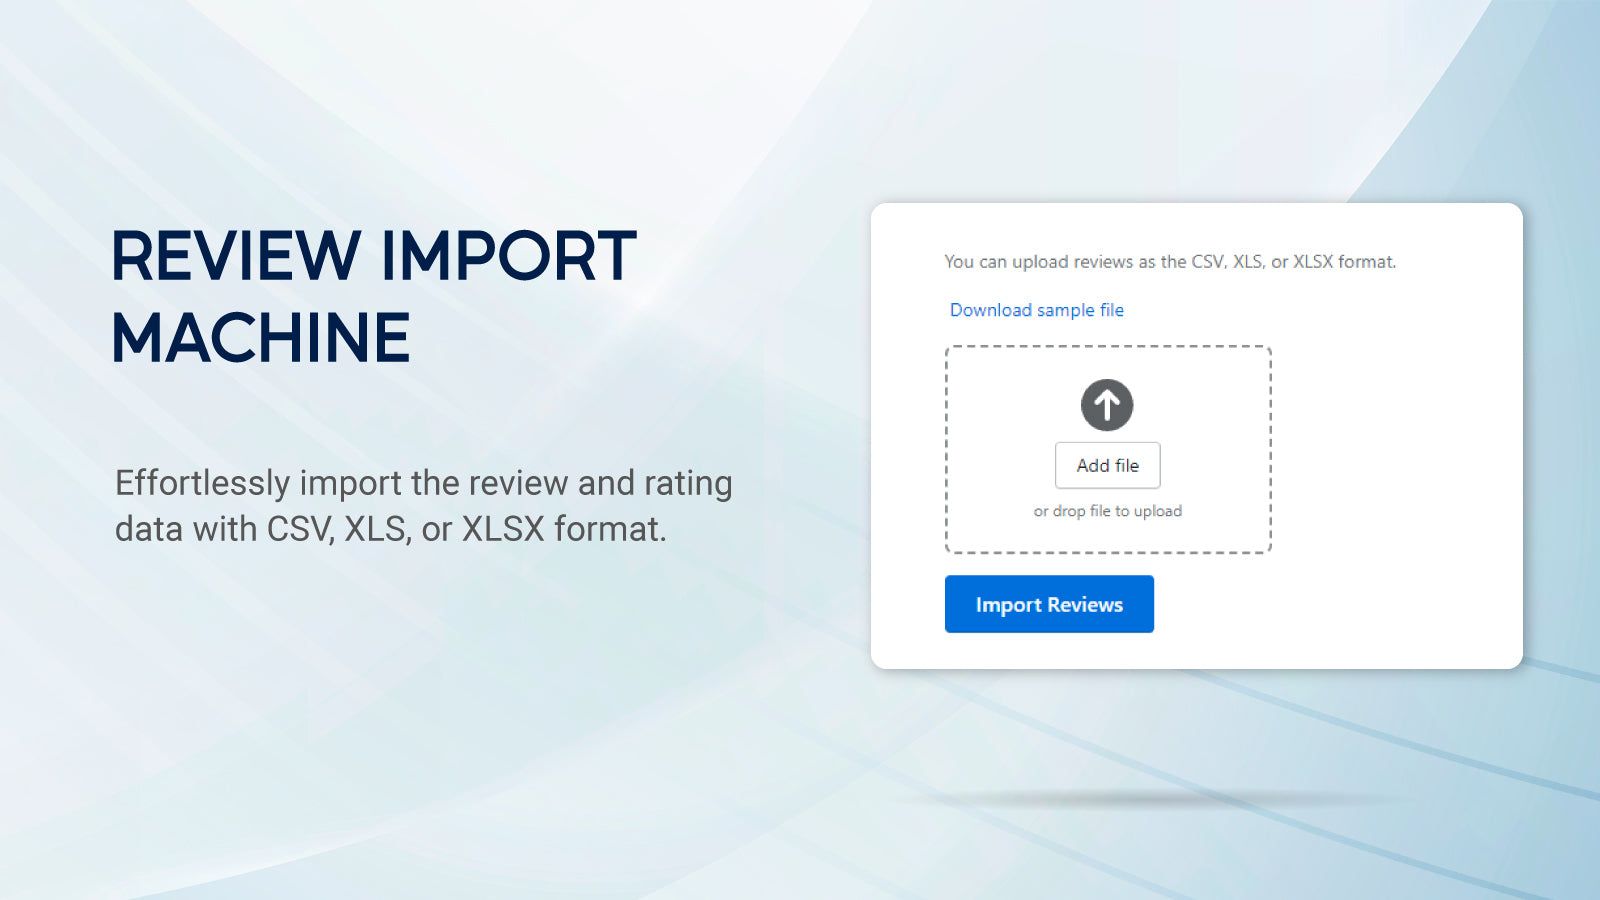 REVIEW IMPORT MACHINE